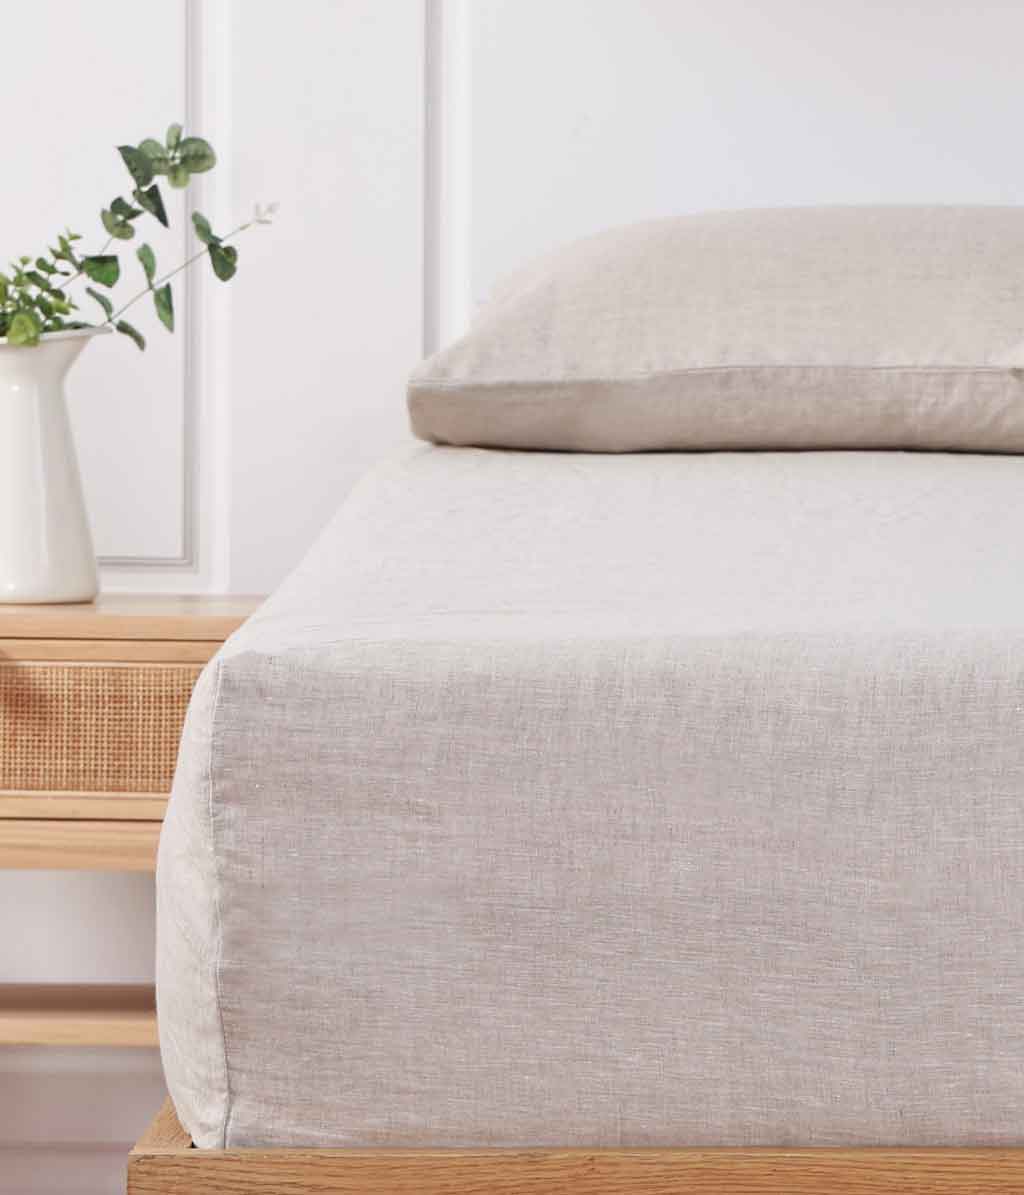 Laundered Linen Natural Fitted Sheet Set